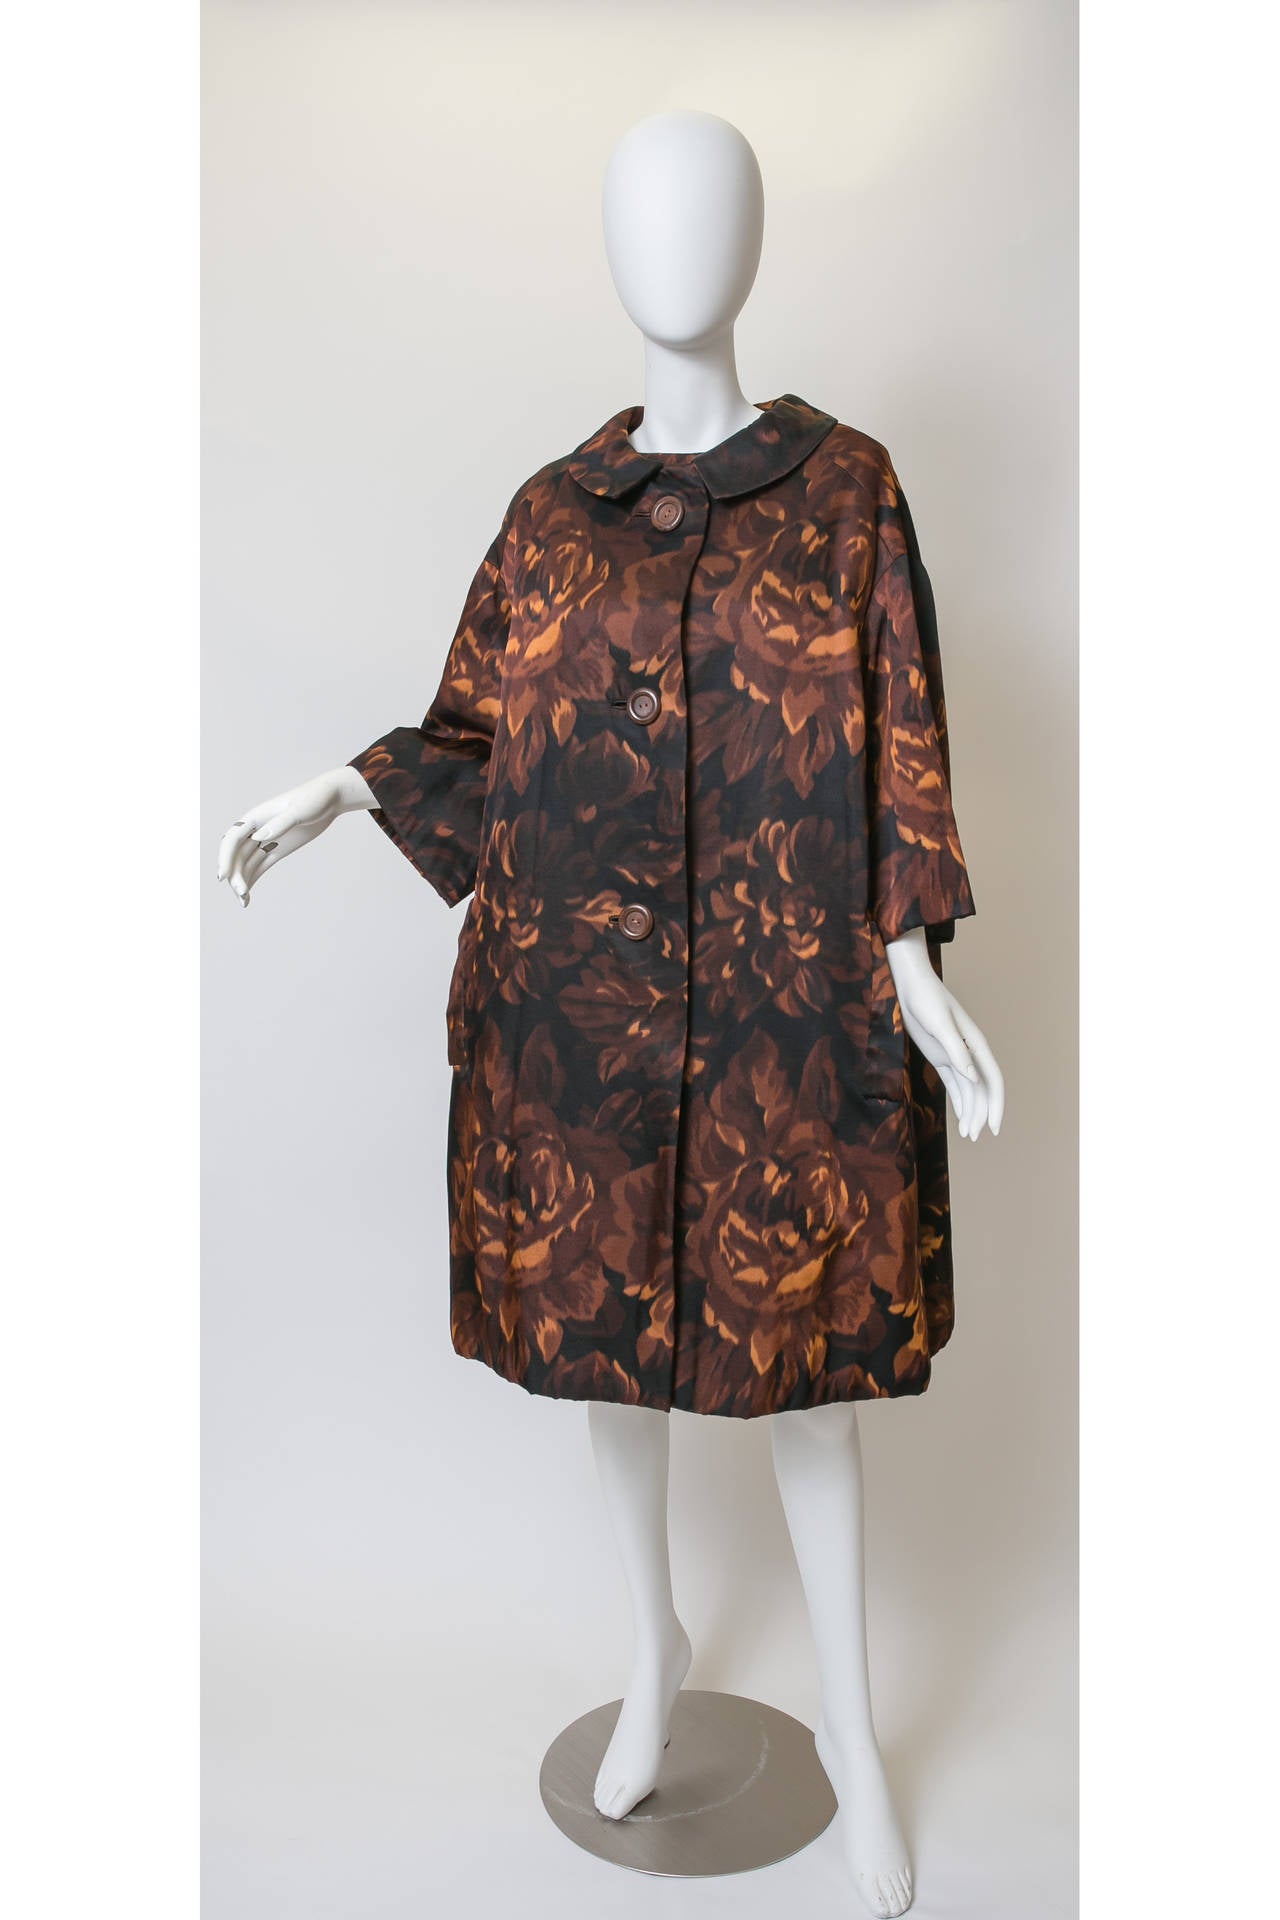 Christian Dior 1950s Dress and Coat Numbered Piece
Gorgeous muted floral silk nipped waist dress with tulle skirt and back bow
3.4 sleeve swing coat in matching fabric with xl wood buttons
Heavy lining to coat for winter weather
estimated size 8